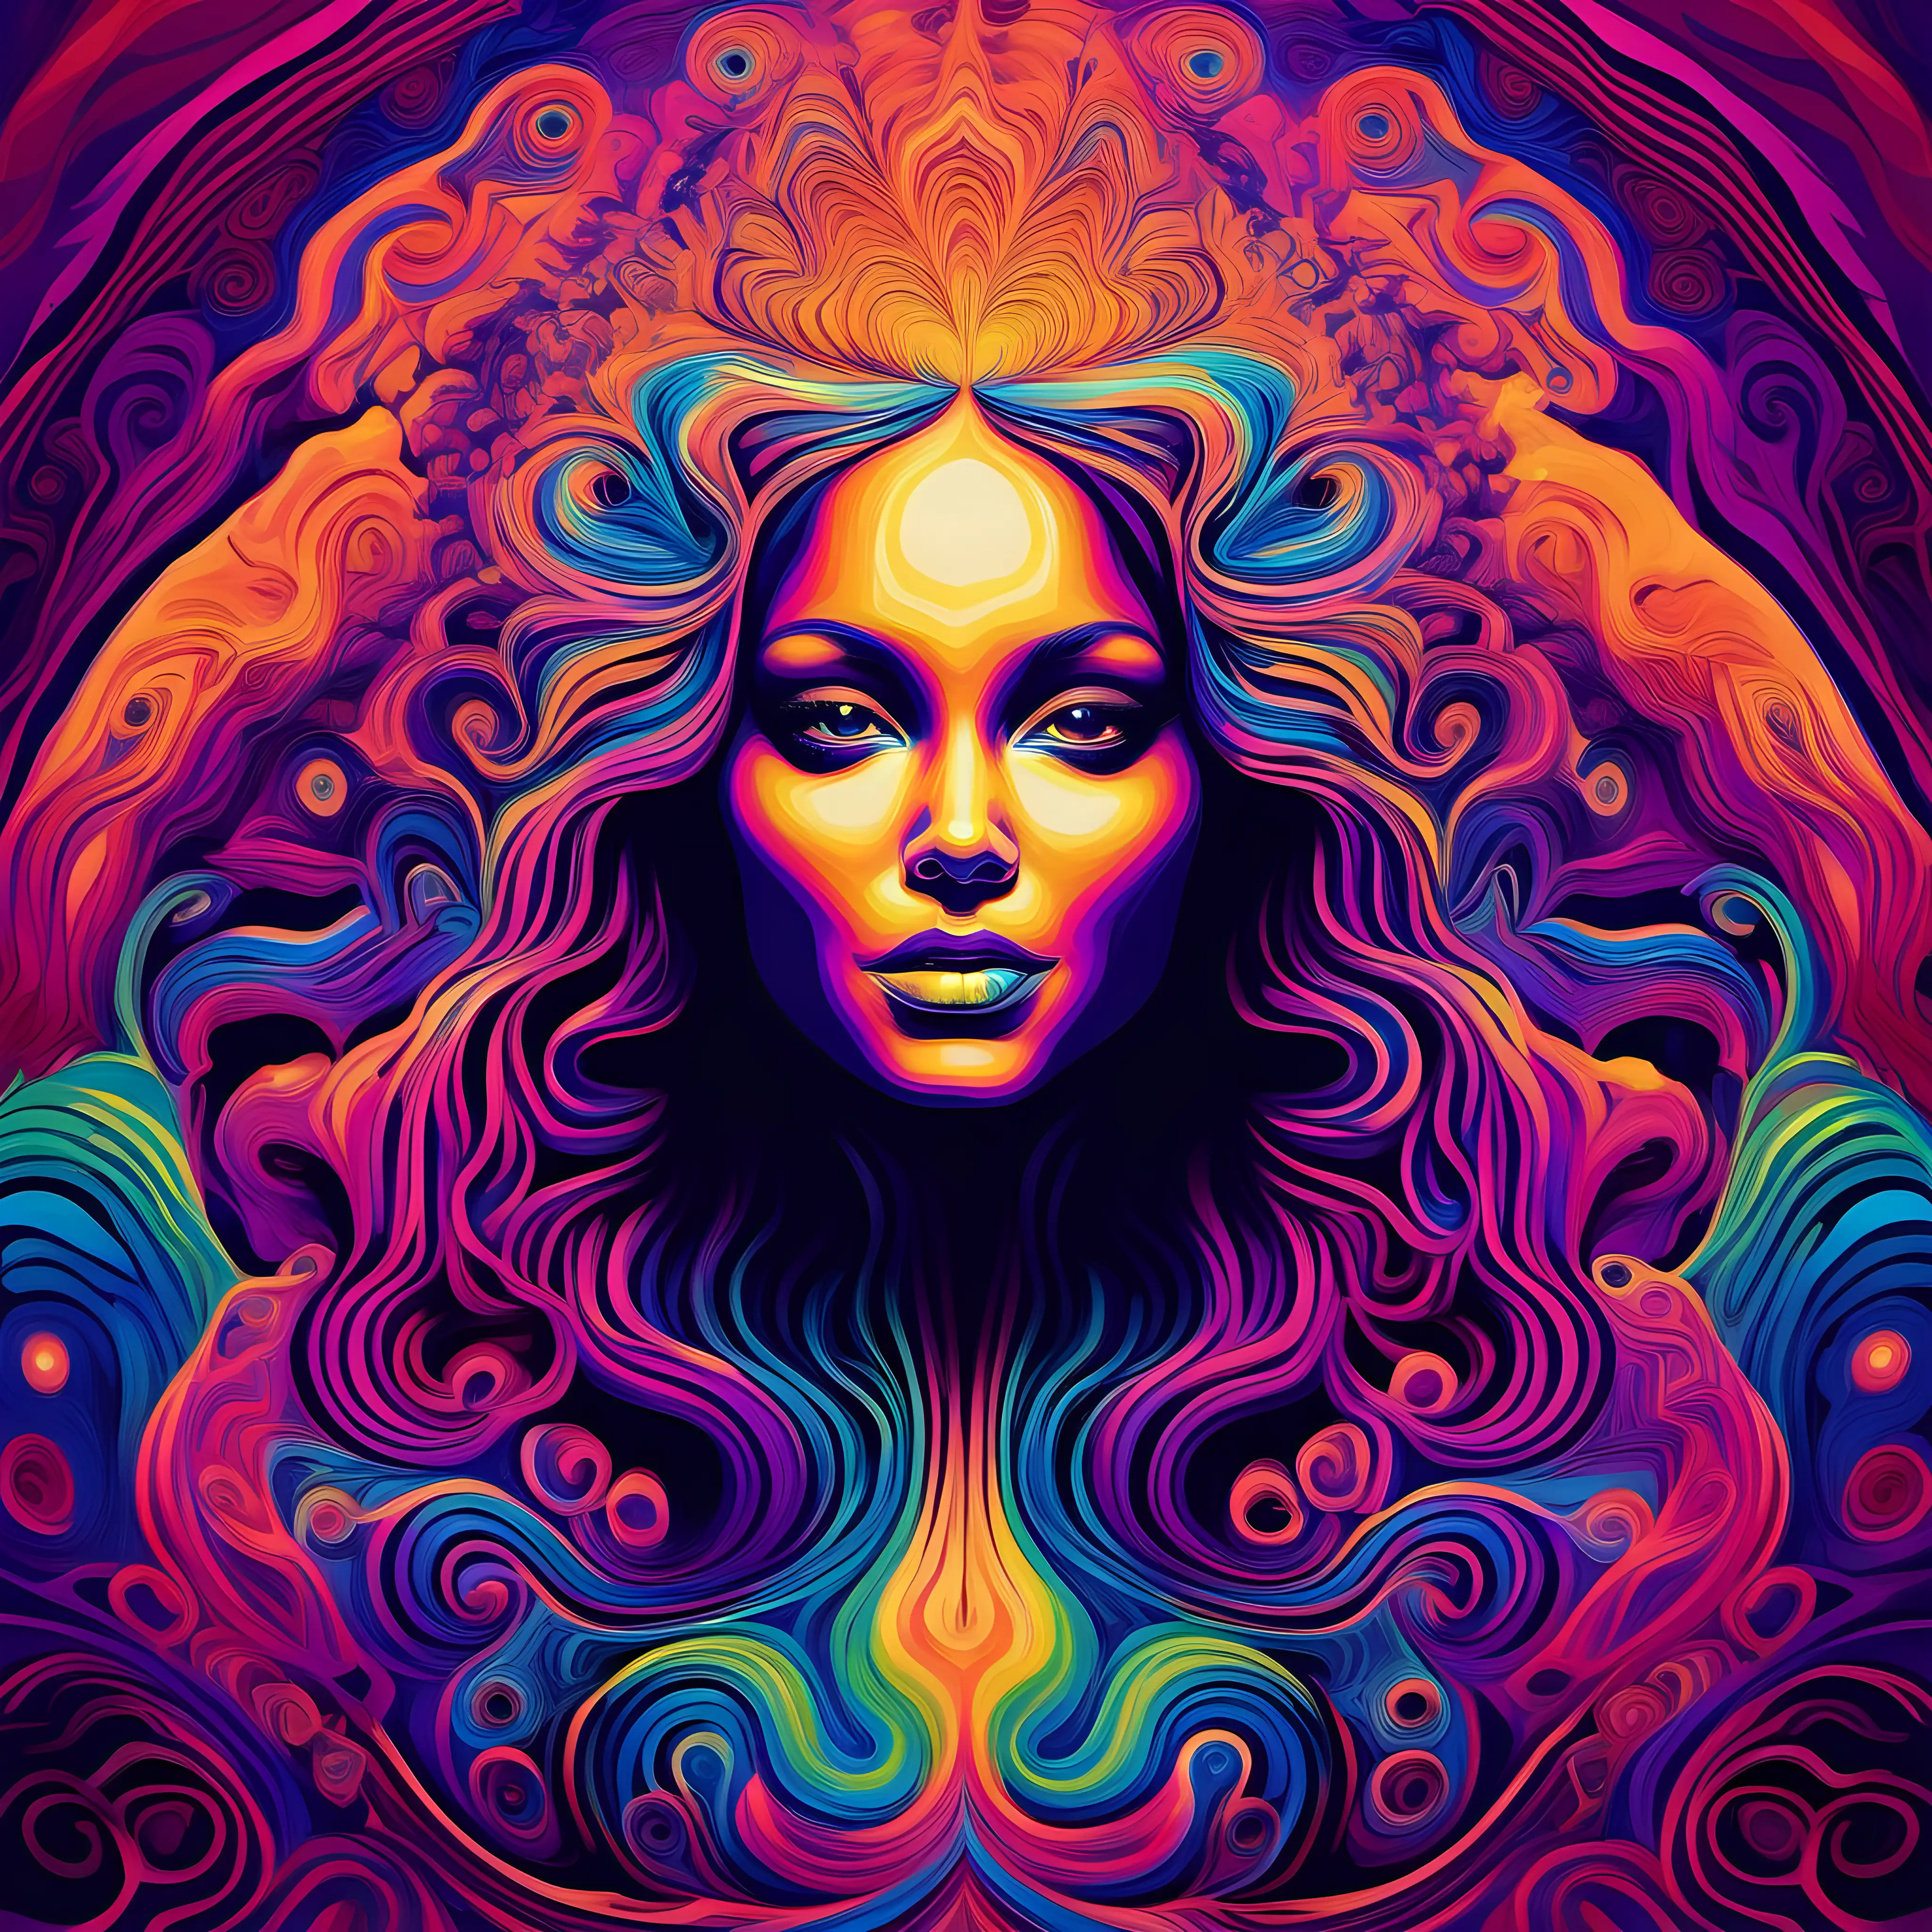 Generate a mesmerizing psychedelic art image featuring a woman as the central subject. Use vibrant, bold, and contrasting colors to create an intense and visually stimulating composition.

The woman should be depicted with flowing, surrealistic features, as if her form is melting or morphing into abstract shapes. Her hair and clothing should have dynamic patterns and colors that blend seamlessly into the psychedelic background.

Surround the woman with swirling patterns, fractals, and optical illusions that radiate from her figure. Use neon-like colors, such as electric blues, fiery oranges, fluorescent pinks, and deep purples, to create a sense of vibrant energy and otherworldly beauty.

Let the composition feel like a journey through the depths of consciousness and imagination. The artwork should evoke a dreamlike and surreal atmosphere, inviting viewers to explore the boundaries of perception and the kaleidoscope of the mind.

Feel free to experiment with various digital effects, gradients, and blending techniques to create a piece that is visually immersive and thought-provoking. Capture the essence of the psychedelic experience, which often involves a sense of inner exploration and transcendence, through this abstract representation of a woman.

The final artwork should be a mesmerizing and captivating portrayal of a woman that draws viewers into a world of vivid colors, shapes, and patterns.